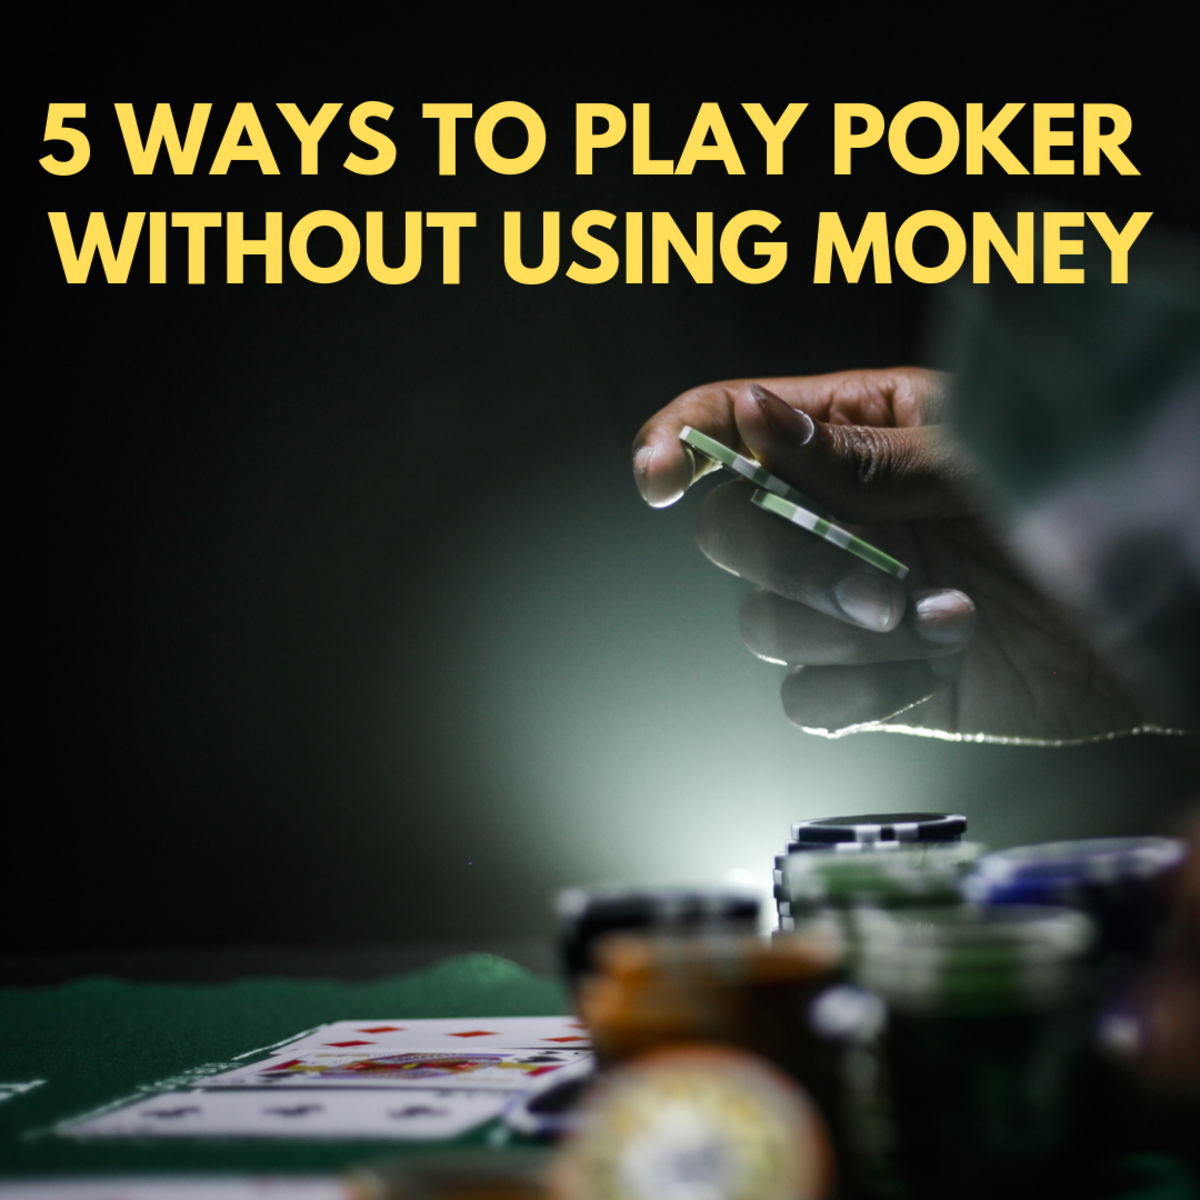 5 Ways on How to Play Poker Without Using Money